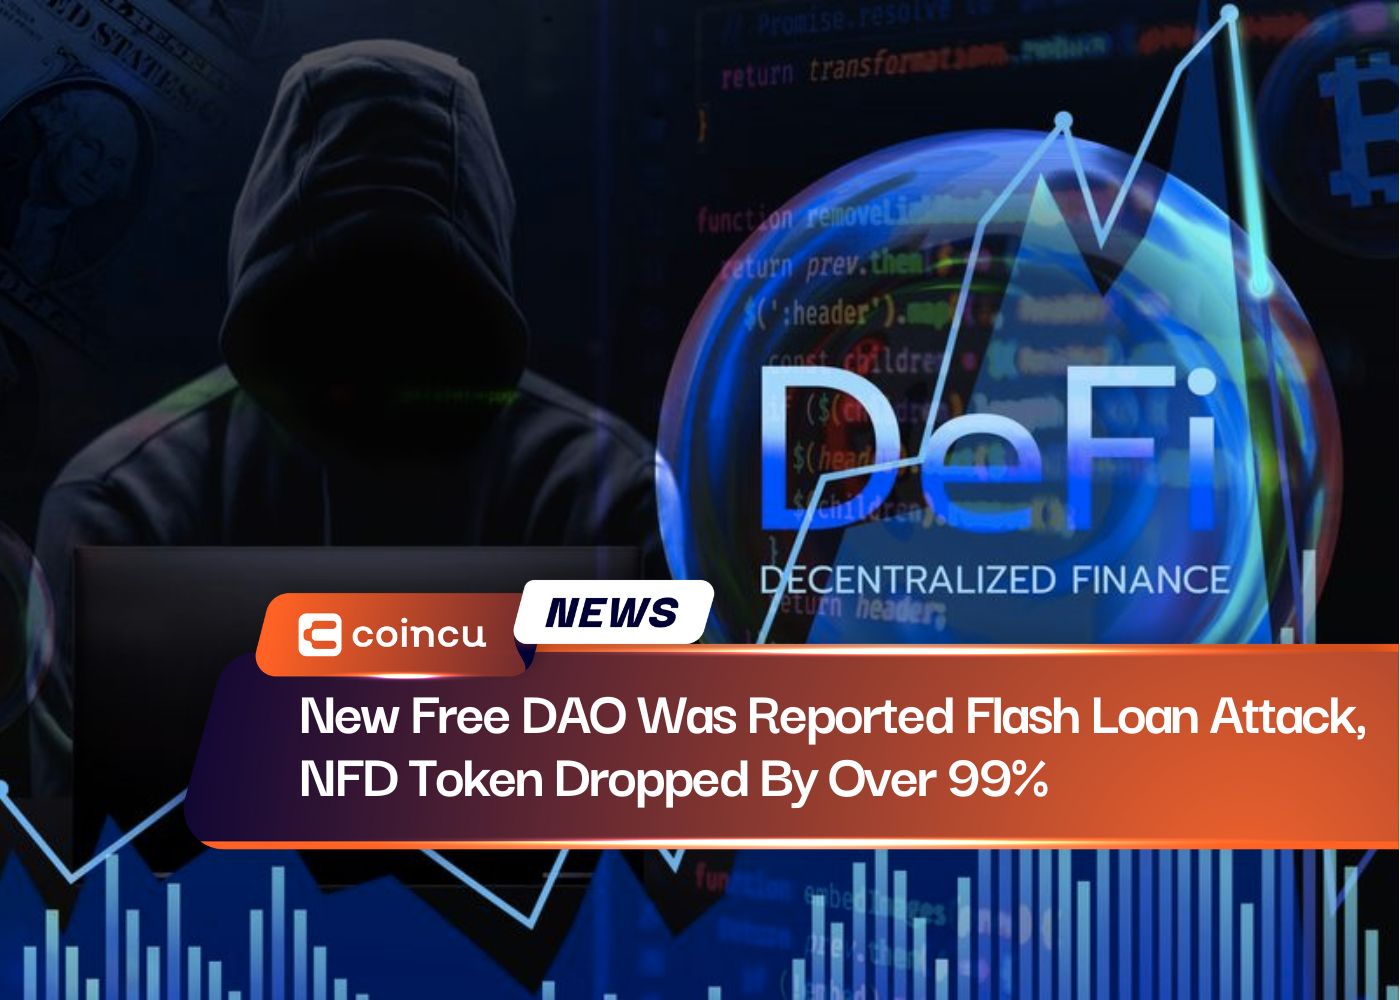 New Free DAO Was Reported Flash Loan Attack, NFD Token Dropped By Over 99%